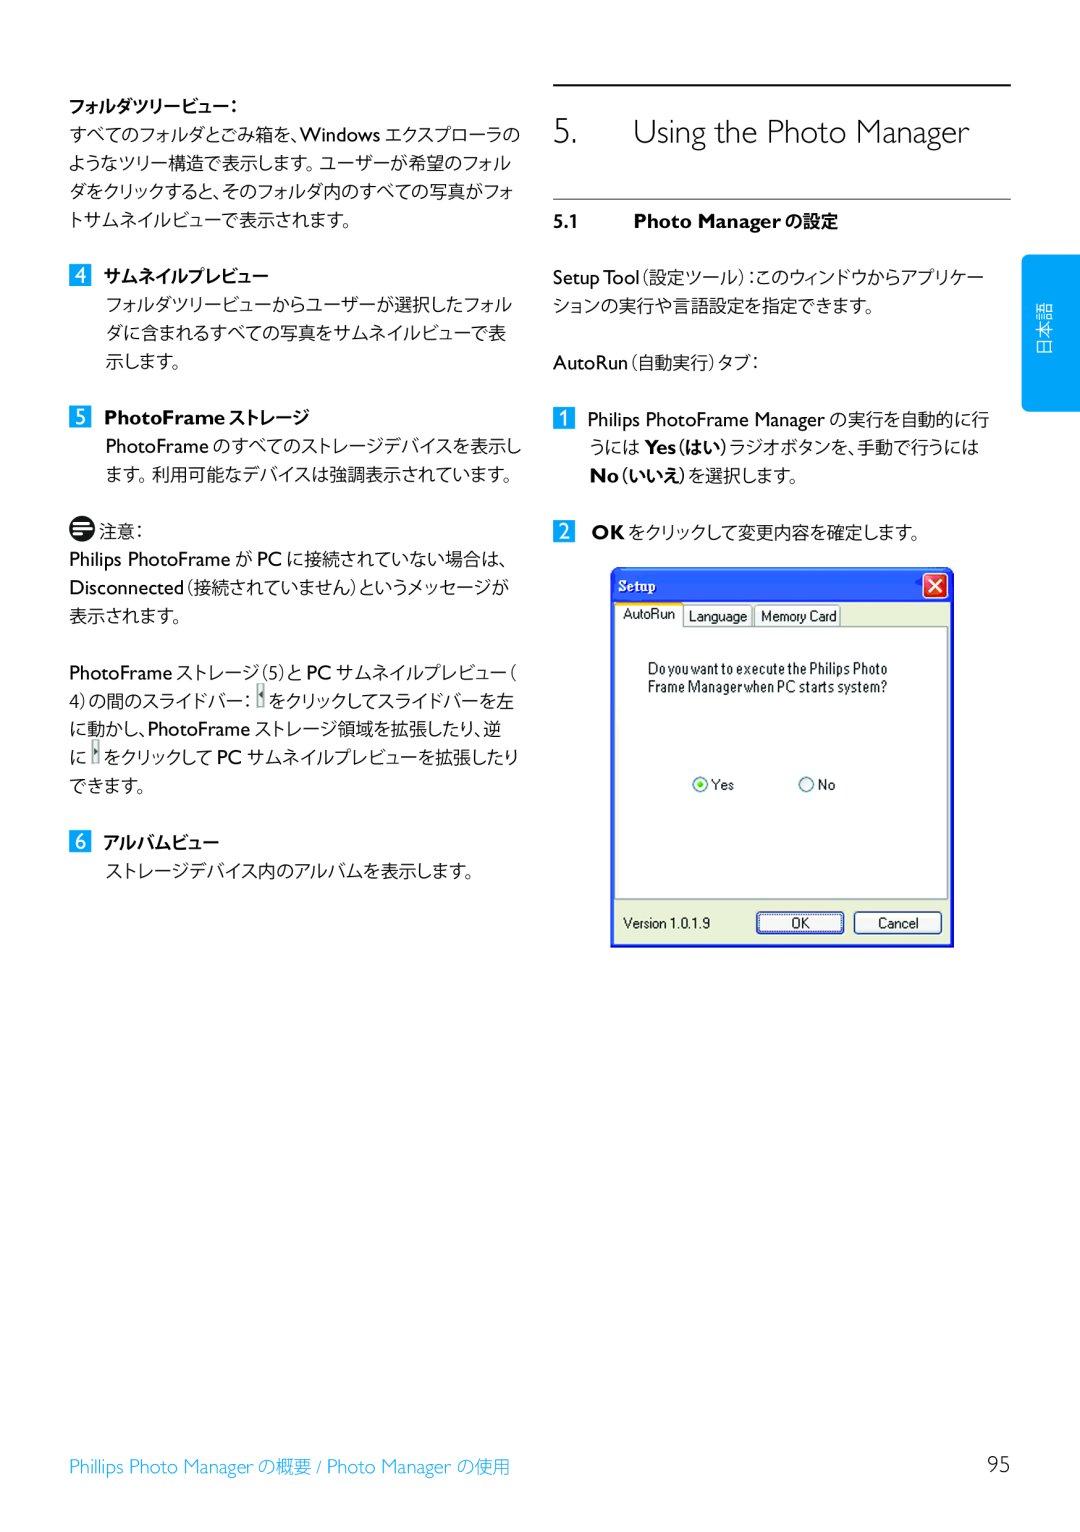 Philips 5FF2 Using the Photo Manager, Photo Manager の設定, PhotoFrame ストレージ, Phillips Photo Manager の概要 / Photo Manager の使用 